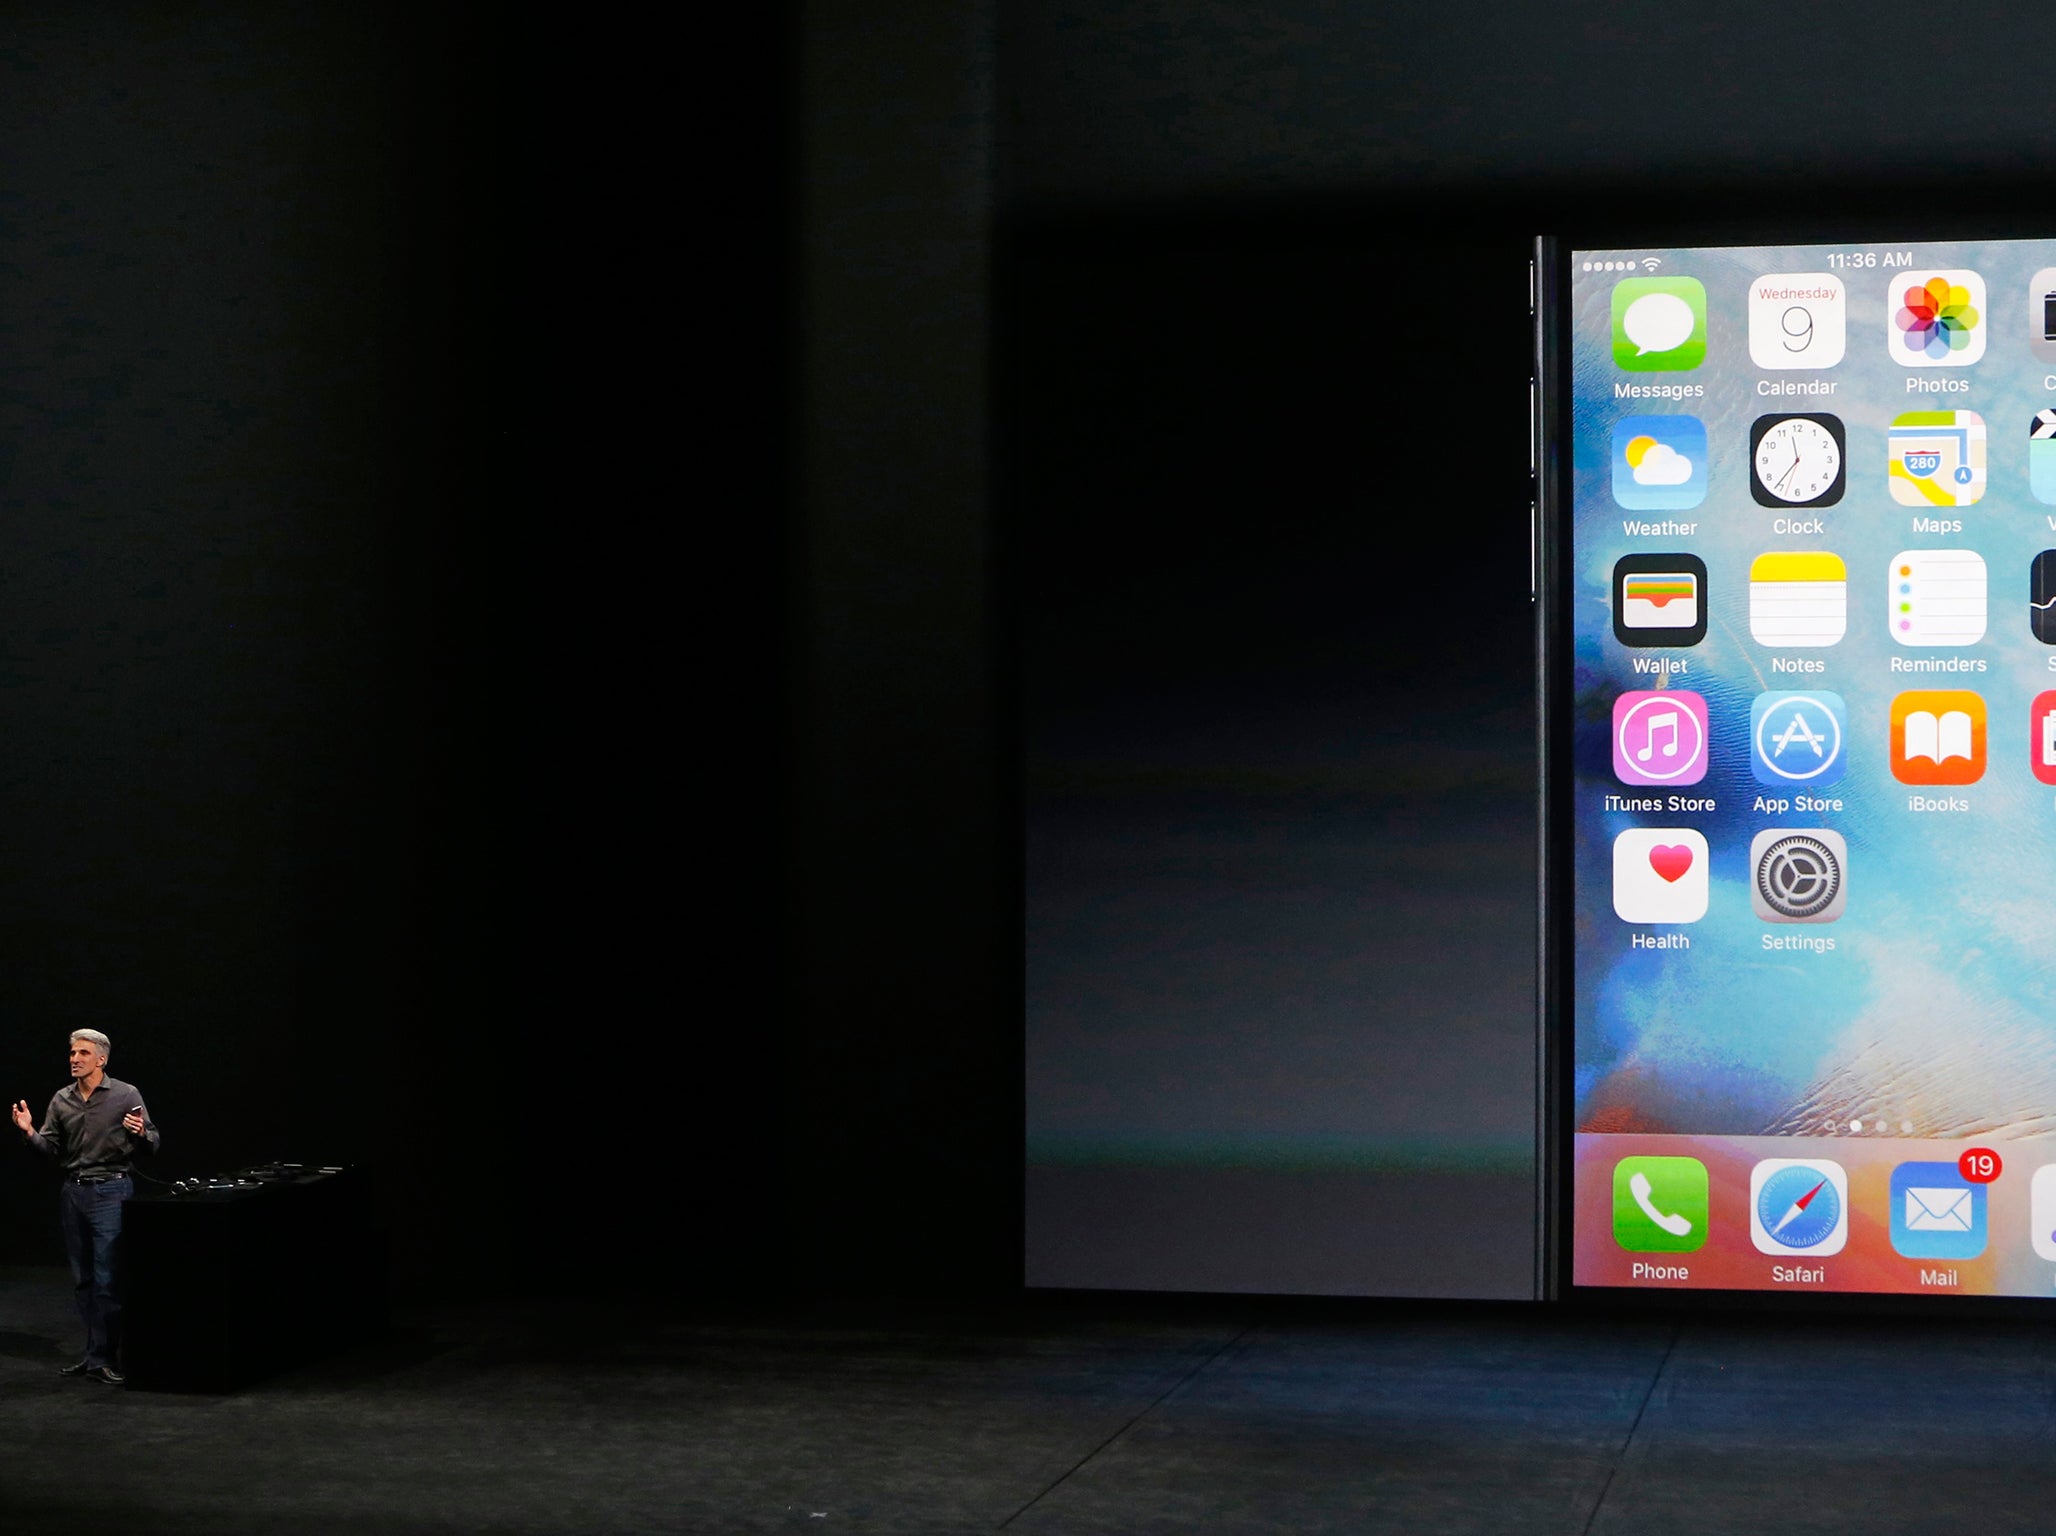 Craig Federighi, Senior Vice President of Mac Software Engineering, takes the stage to discuss the 3D Touch featured on the new iPhone 6s line during an Apple media event in San Francisco, California, September 9, 2015